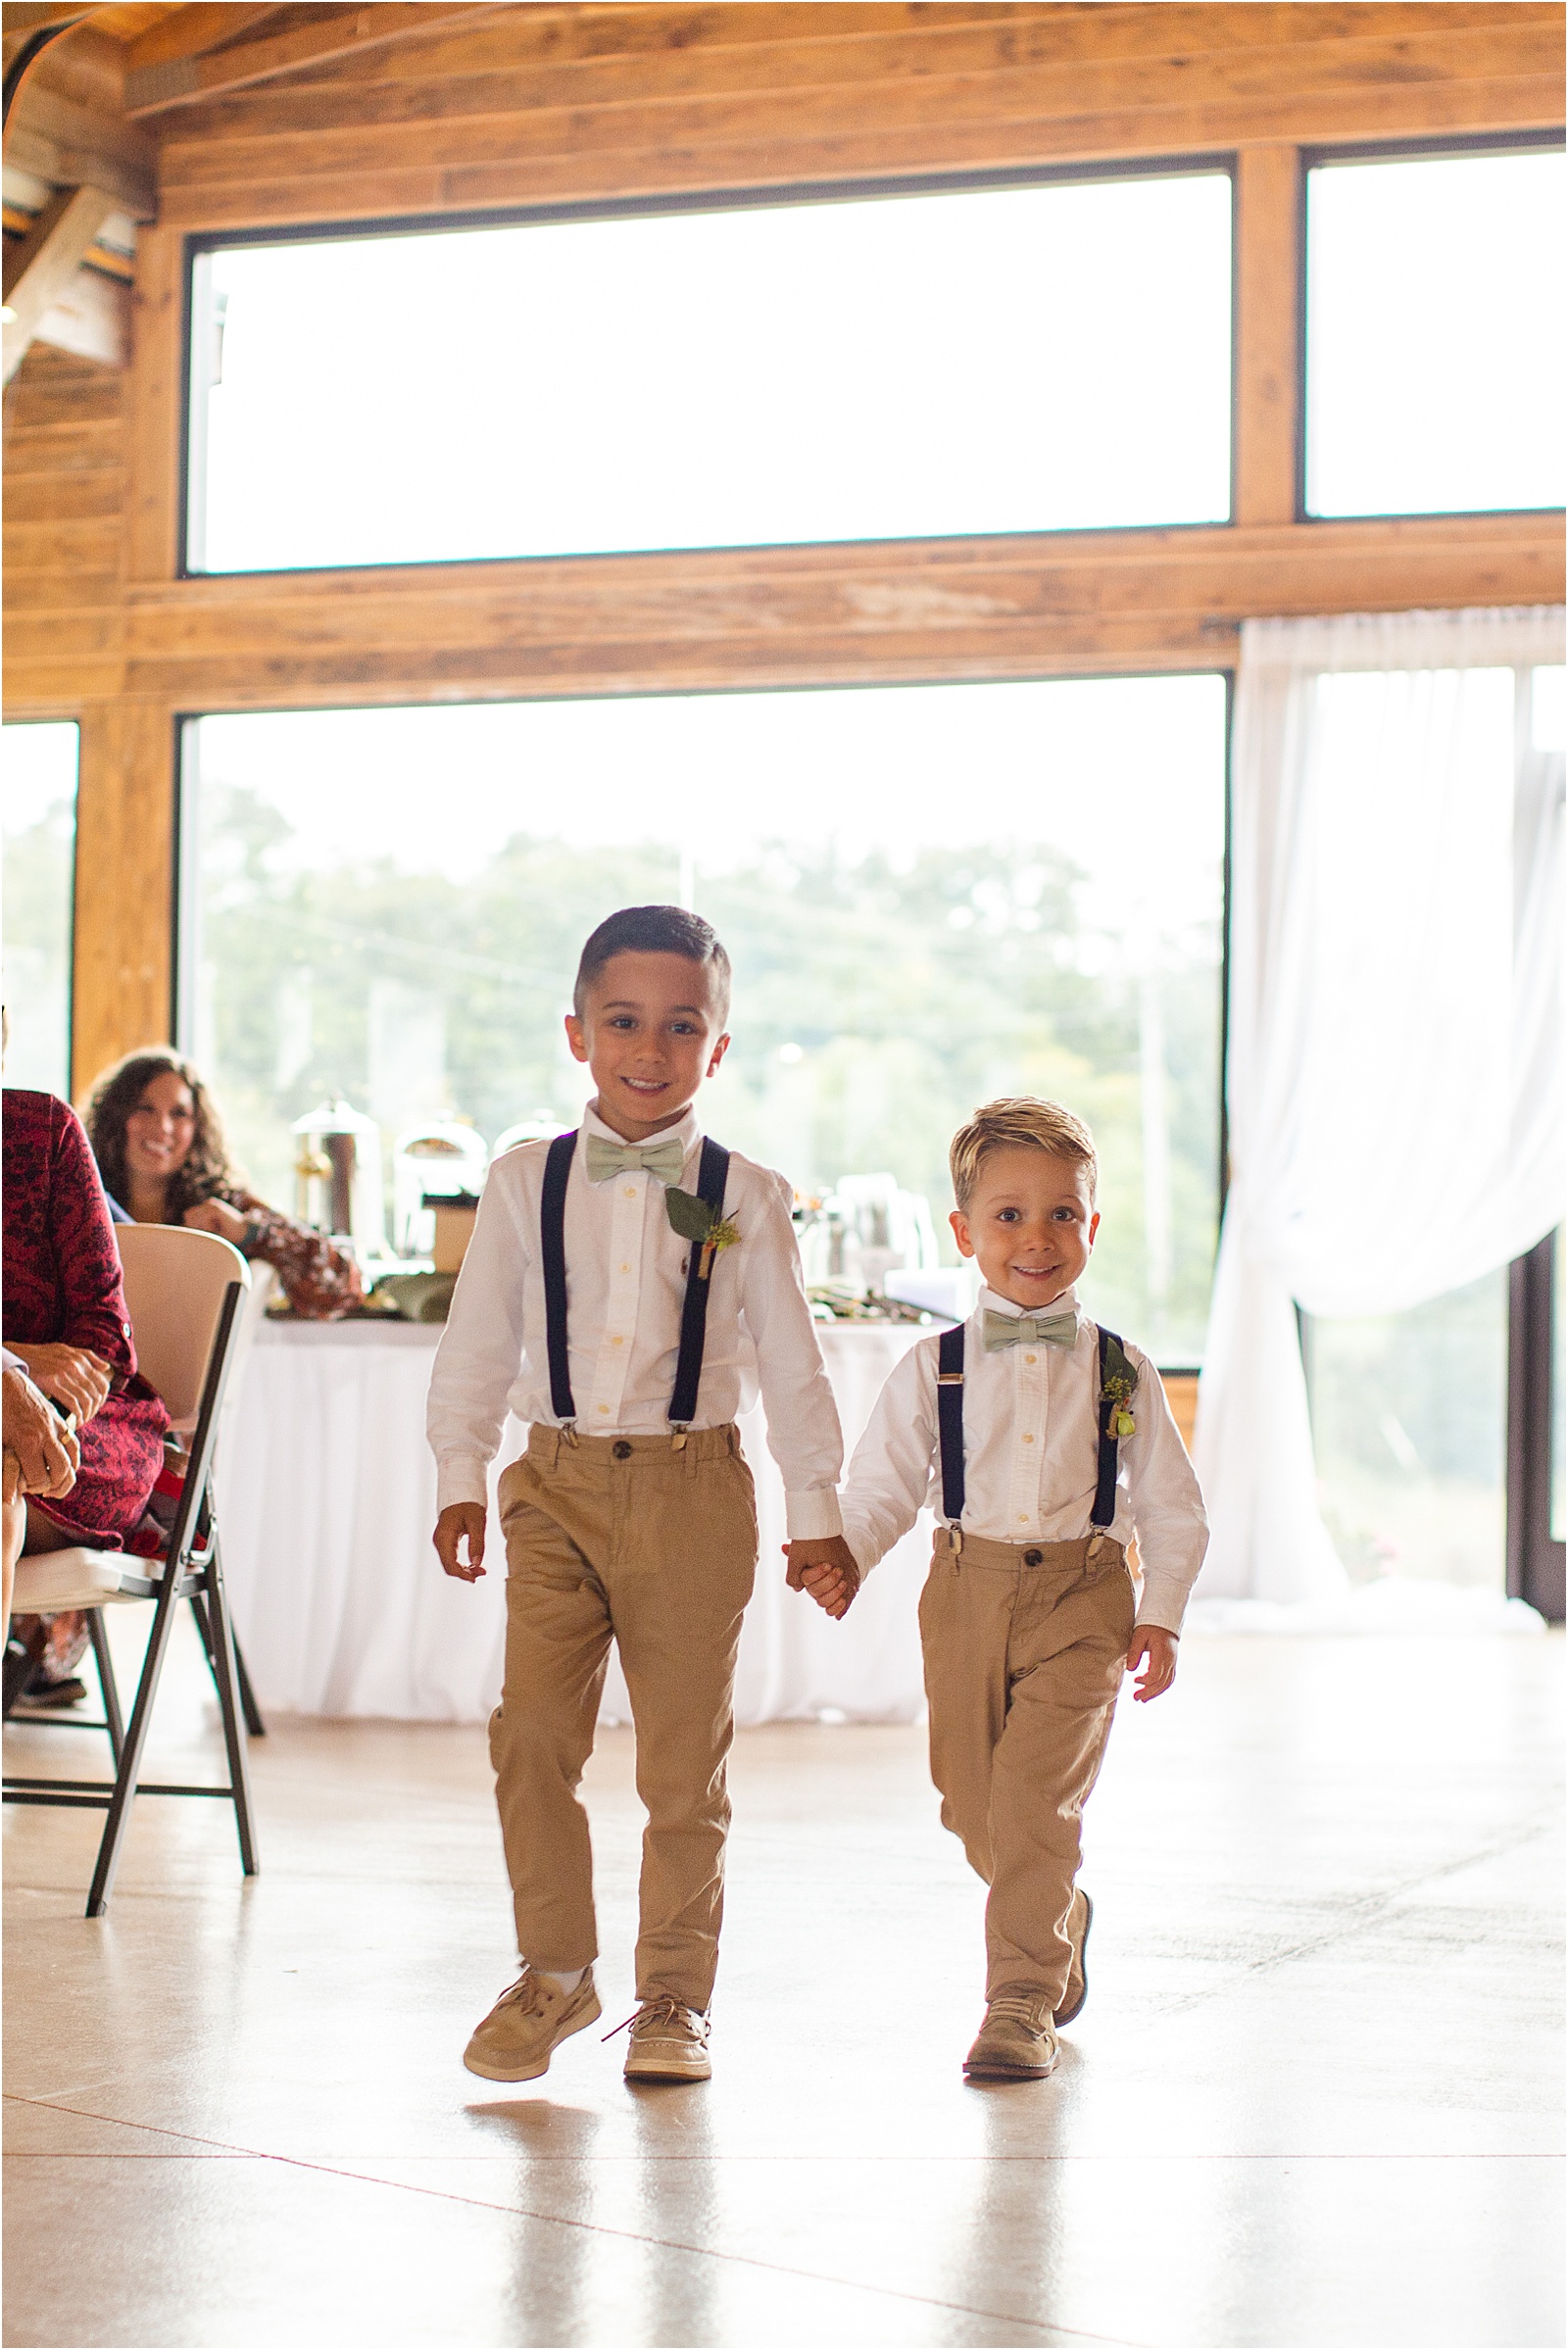 two young boys in wedding clothes holding hands